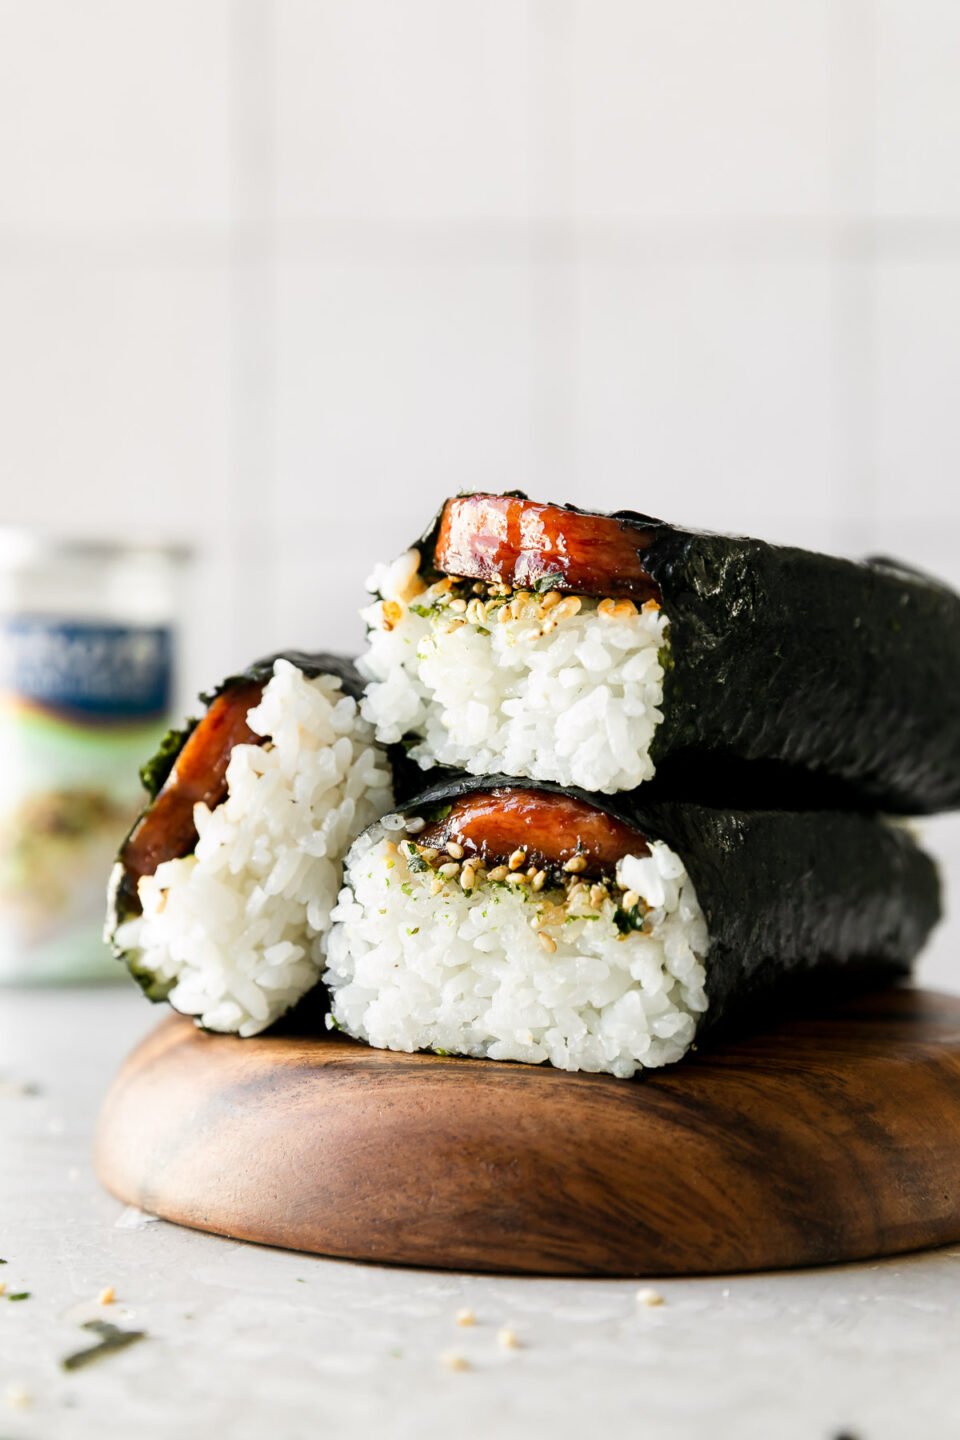 Three Hawaiian spam musubi are arranged atop a wooden serving platter. The platter sits atop a creamy white textured surface and a container of Furikake seasoning sits out of focus in the background.